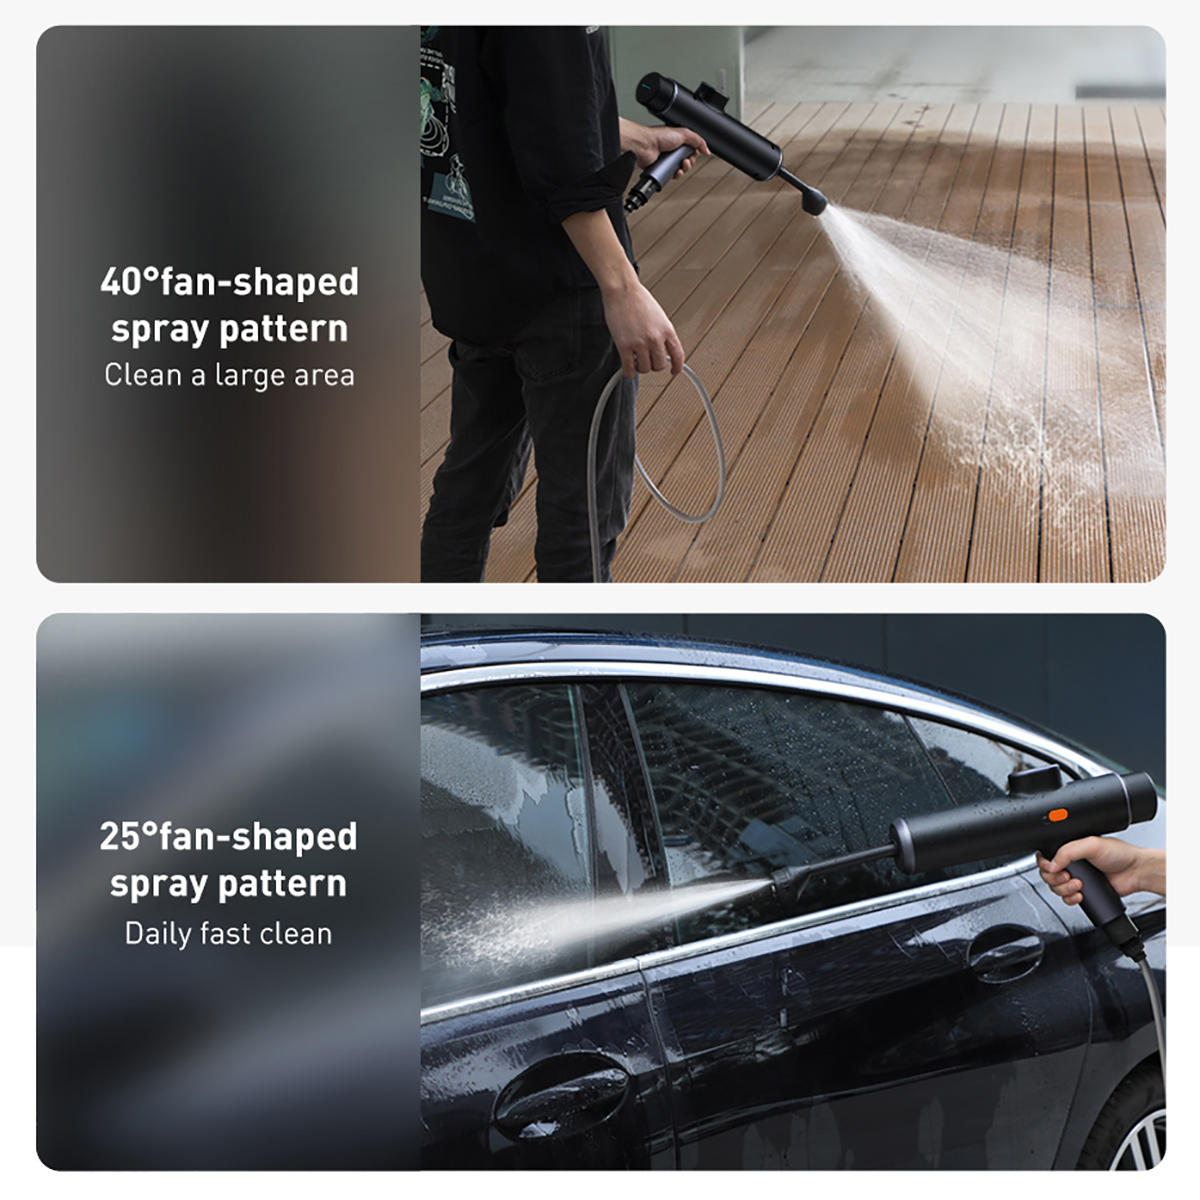 Display-Portable-Cordless-High-Pressure-Washer-Machine-USB-Rechargeable-Electric-Car-Washing-Water-S-1861681-13